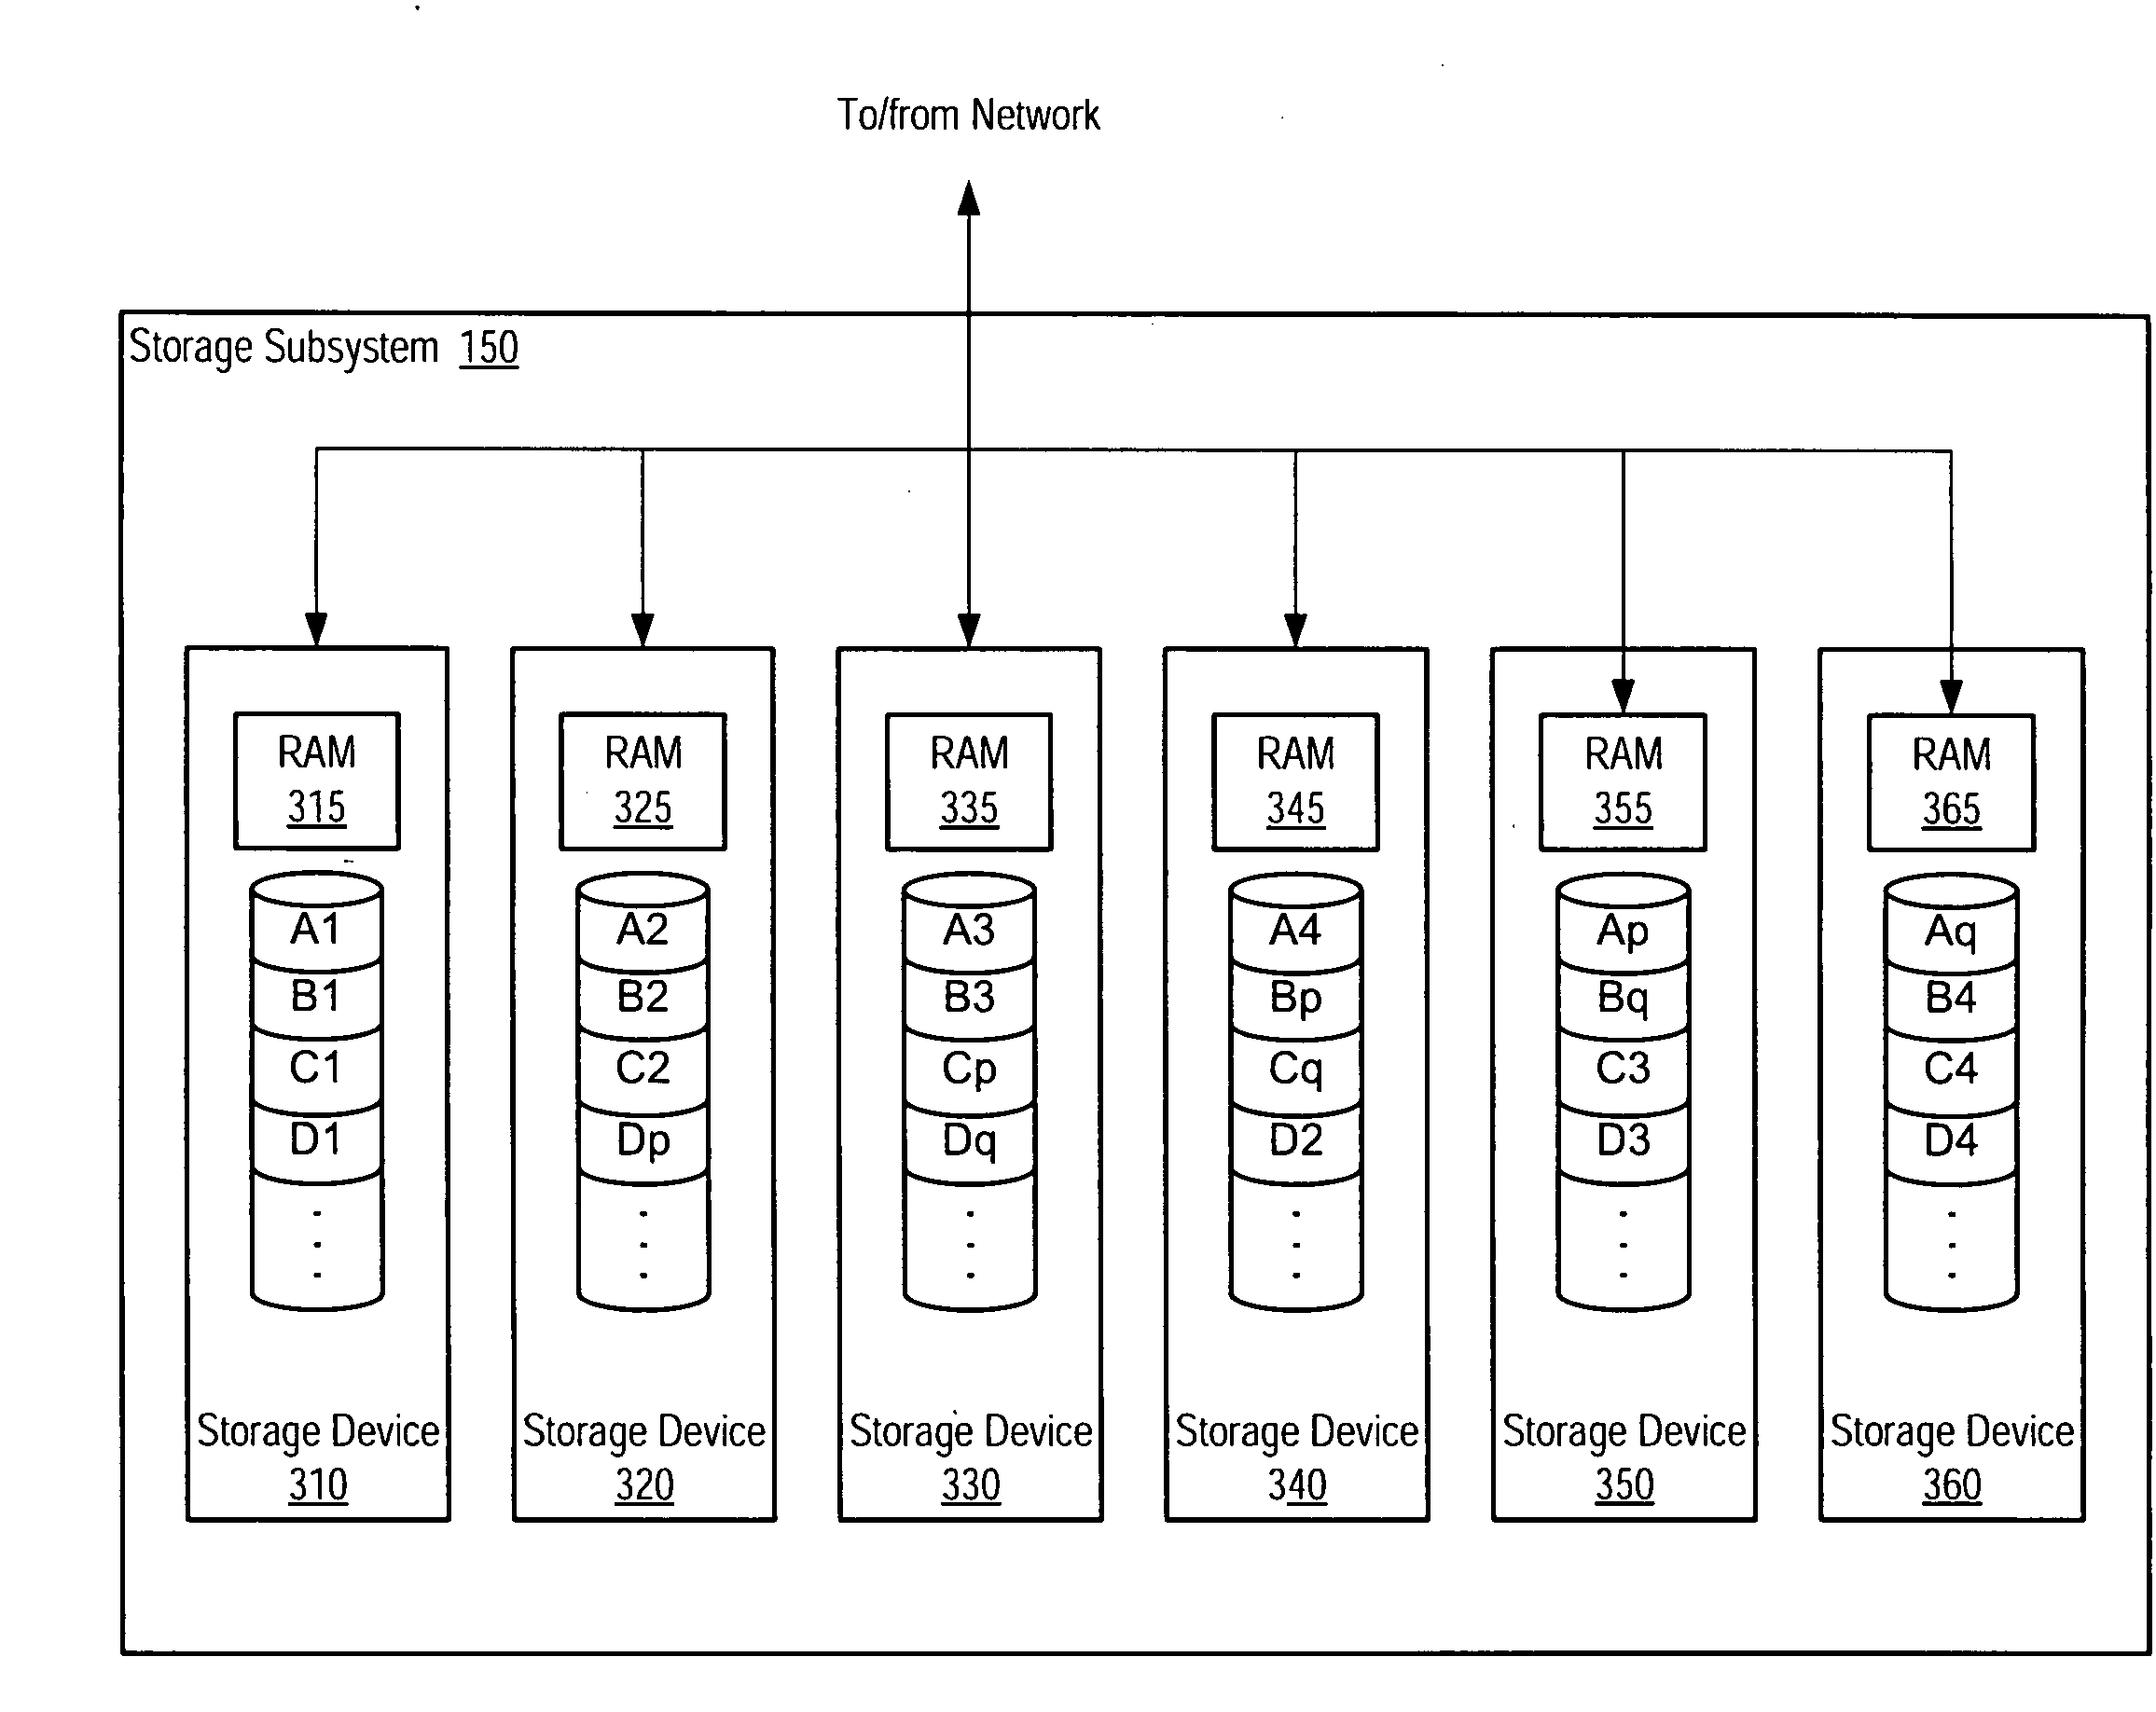 Failure handling using overlay objects on a file system using object based storage devices